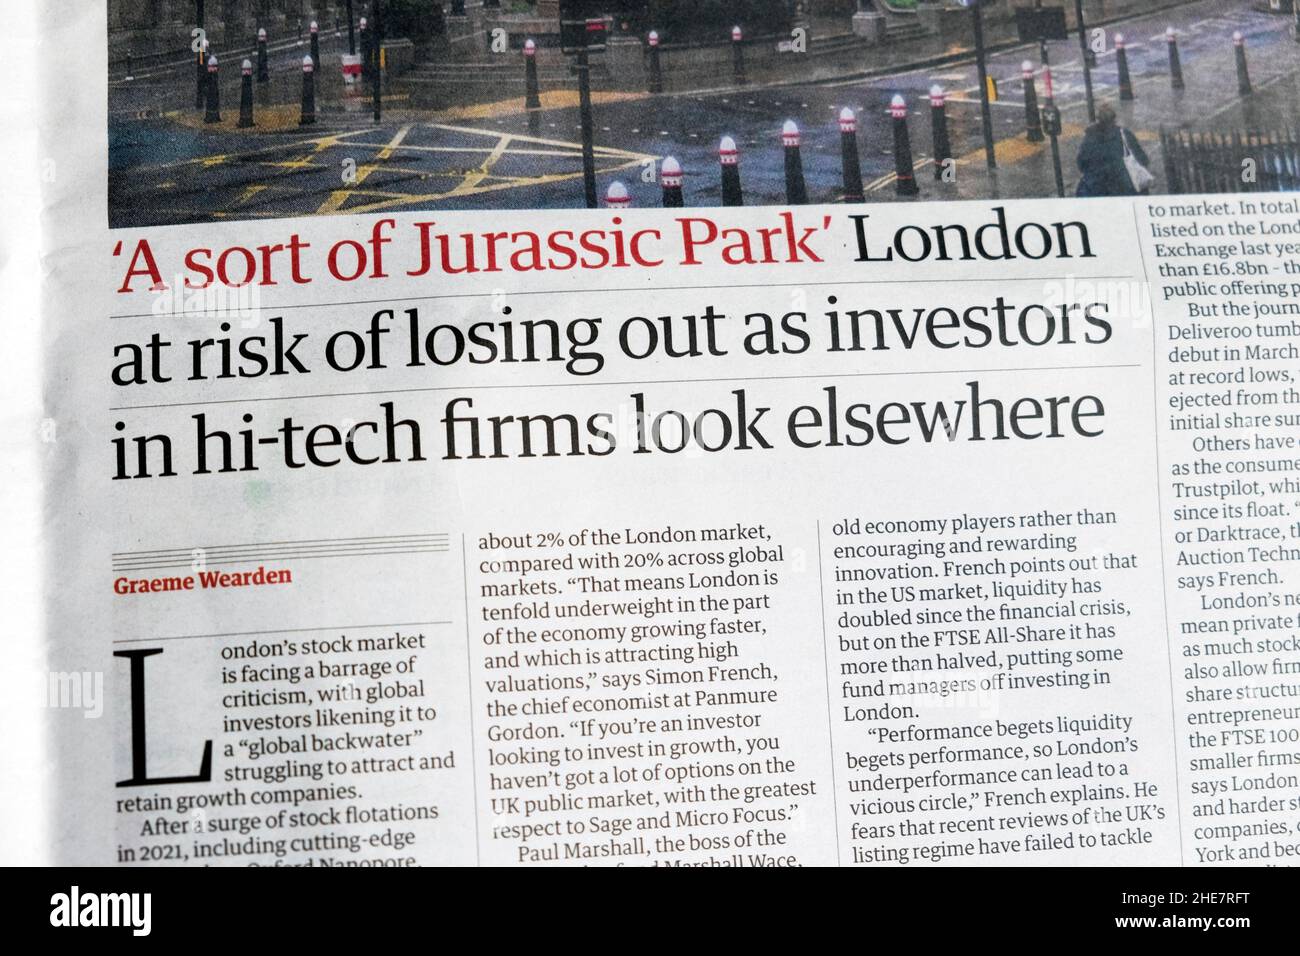 'A sort of Jurassic Park' London at risk of losing out as investors in hi-tech firms look elsewhere' newspaper headline on 4 January 2022 Britain UK Stock Photo